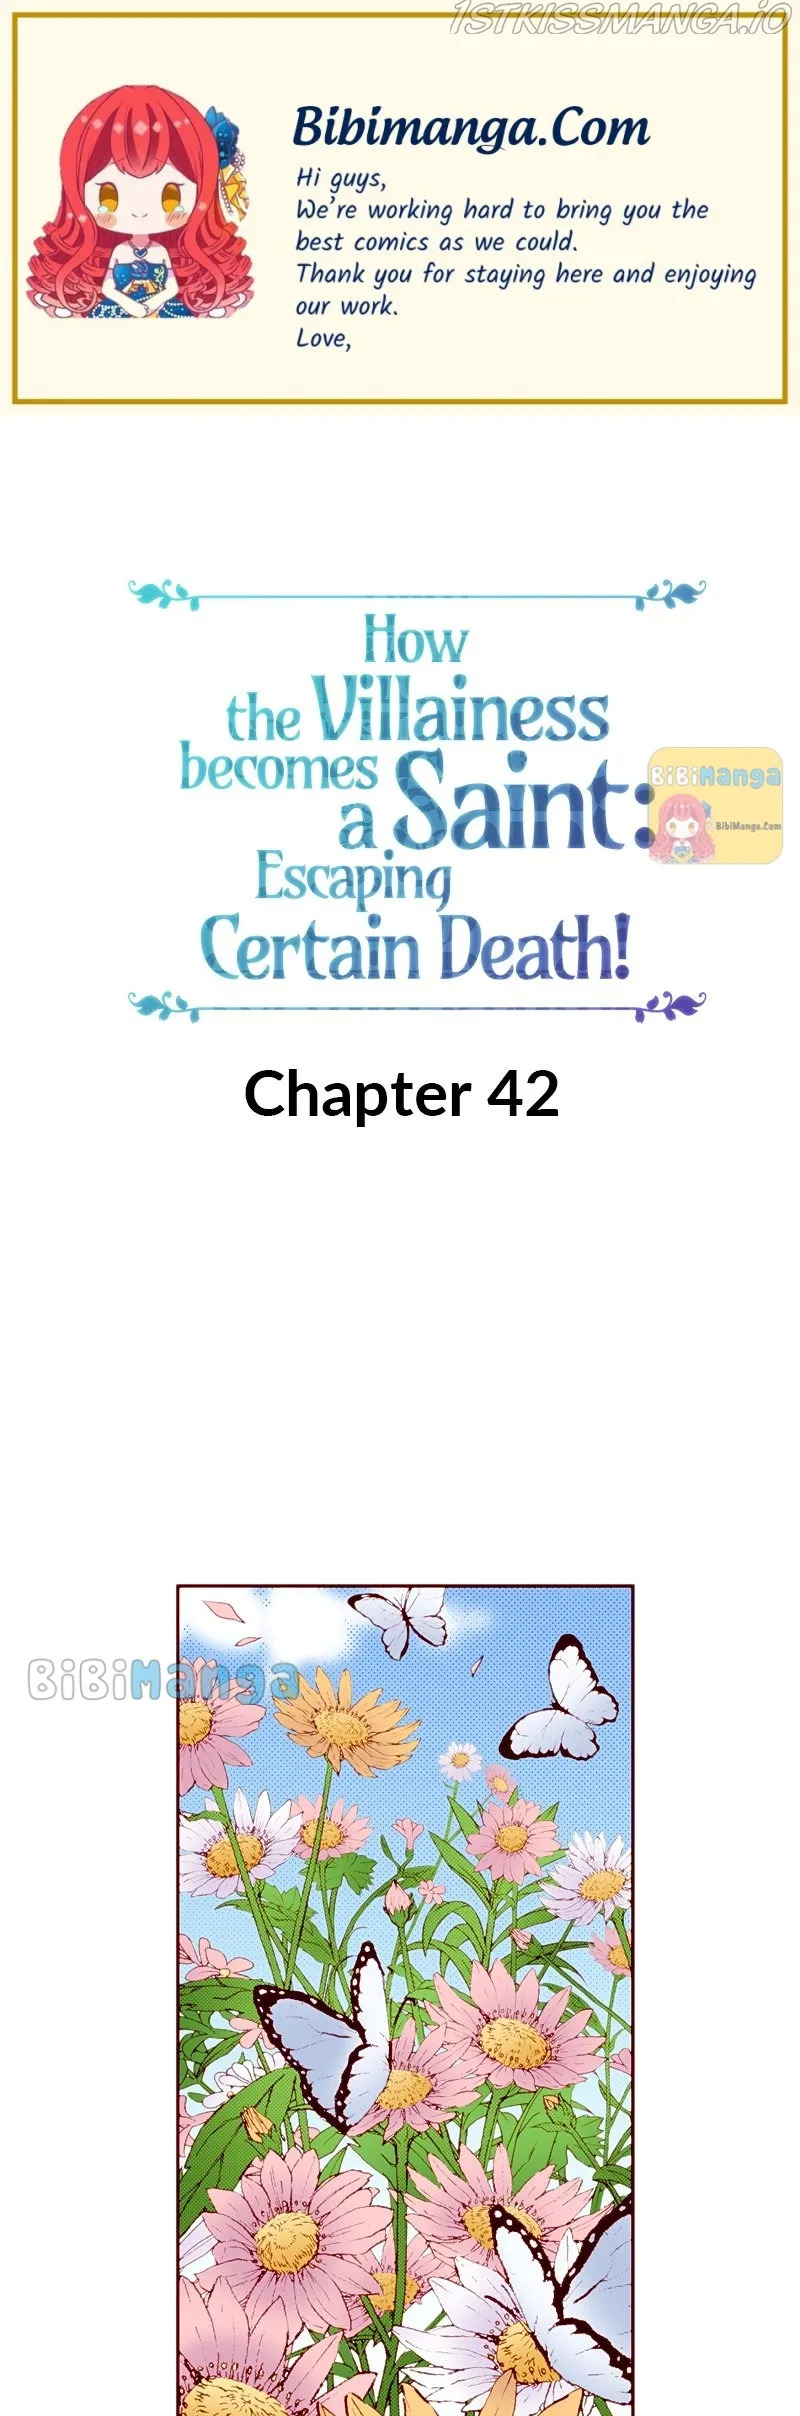 How The Villainess Becomes A Saint: Escaping Certain Death! Chapter 42